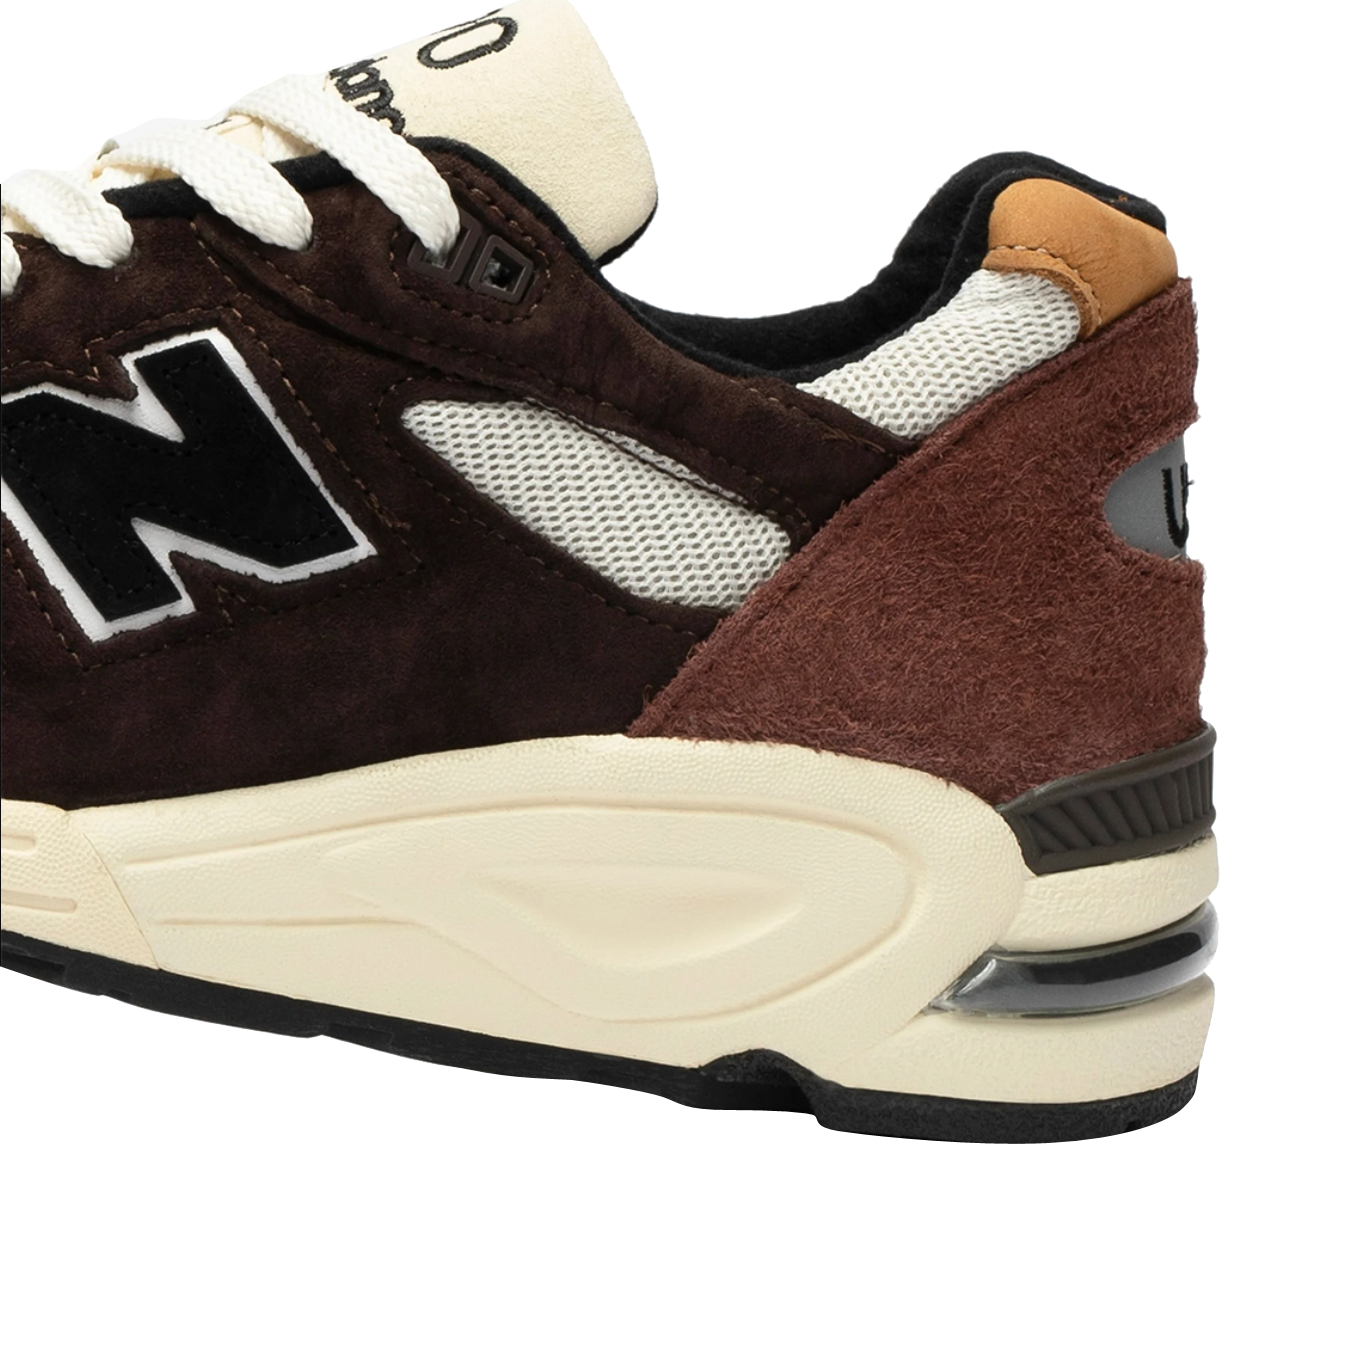 BUY New Balance 990v2 Made In USA Brown | Kixify Marketplace